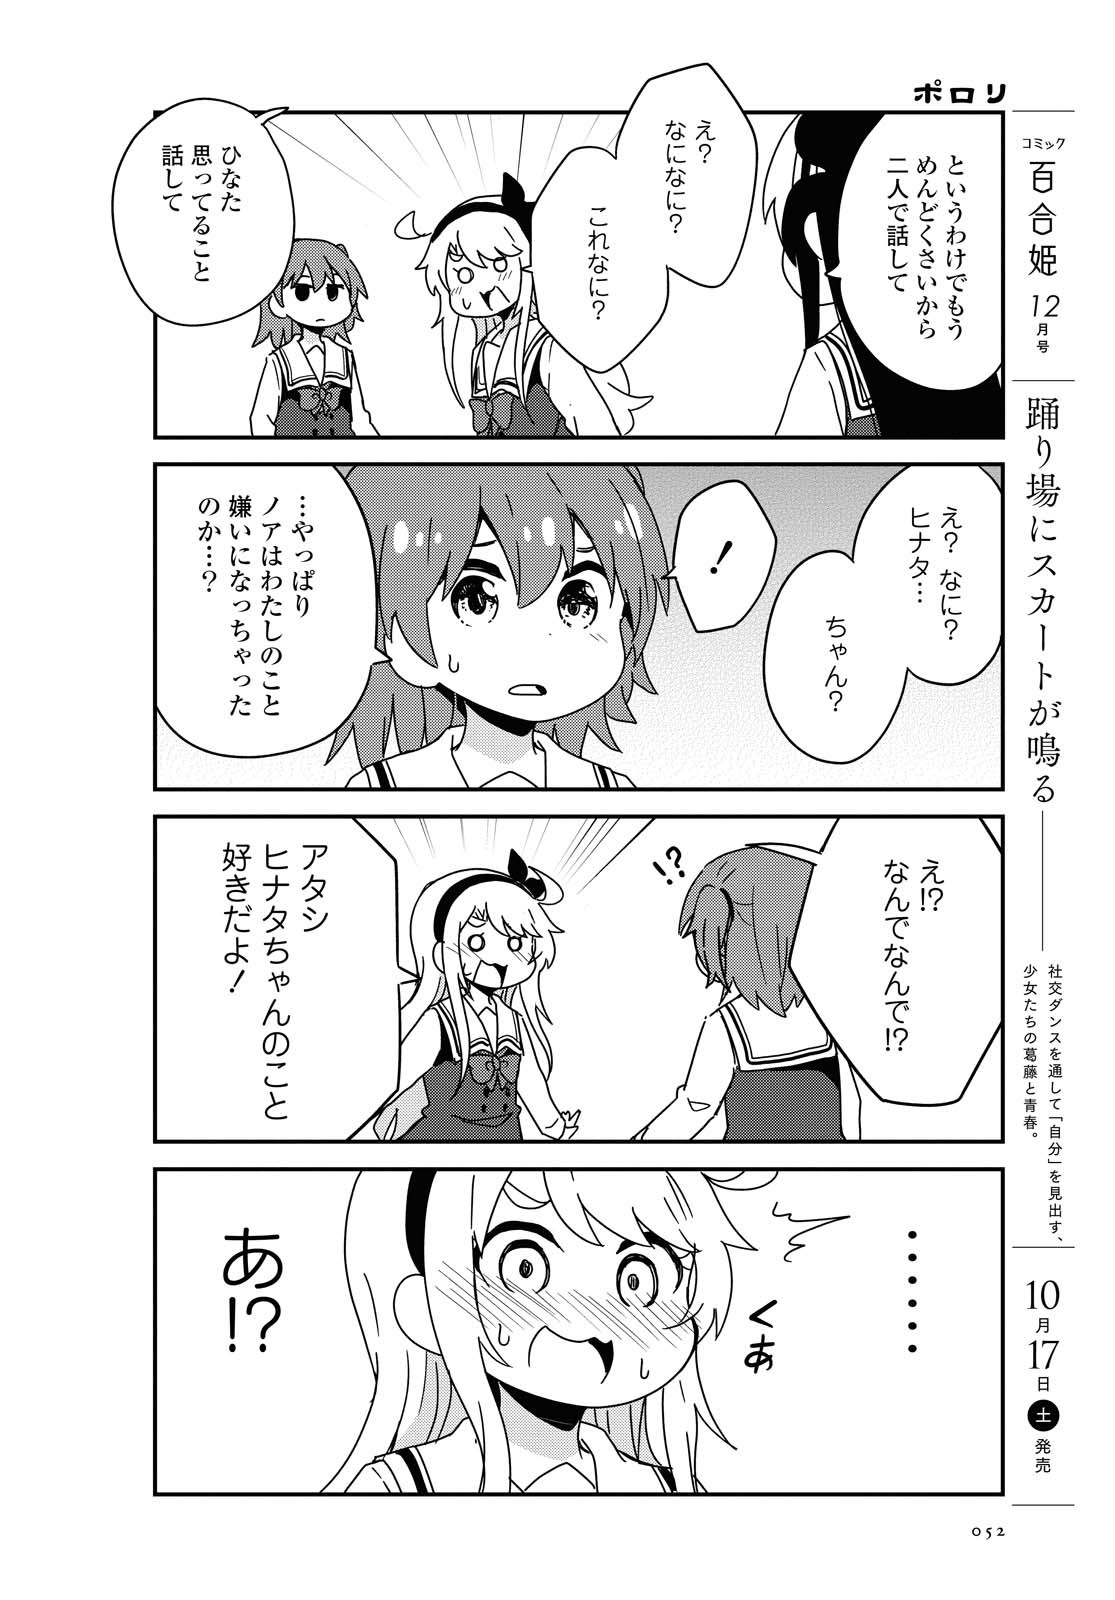 Wataten! An Angel Flew Down to Me 私に天使が舞い降りた！ 第70話 - Page 10